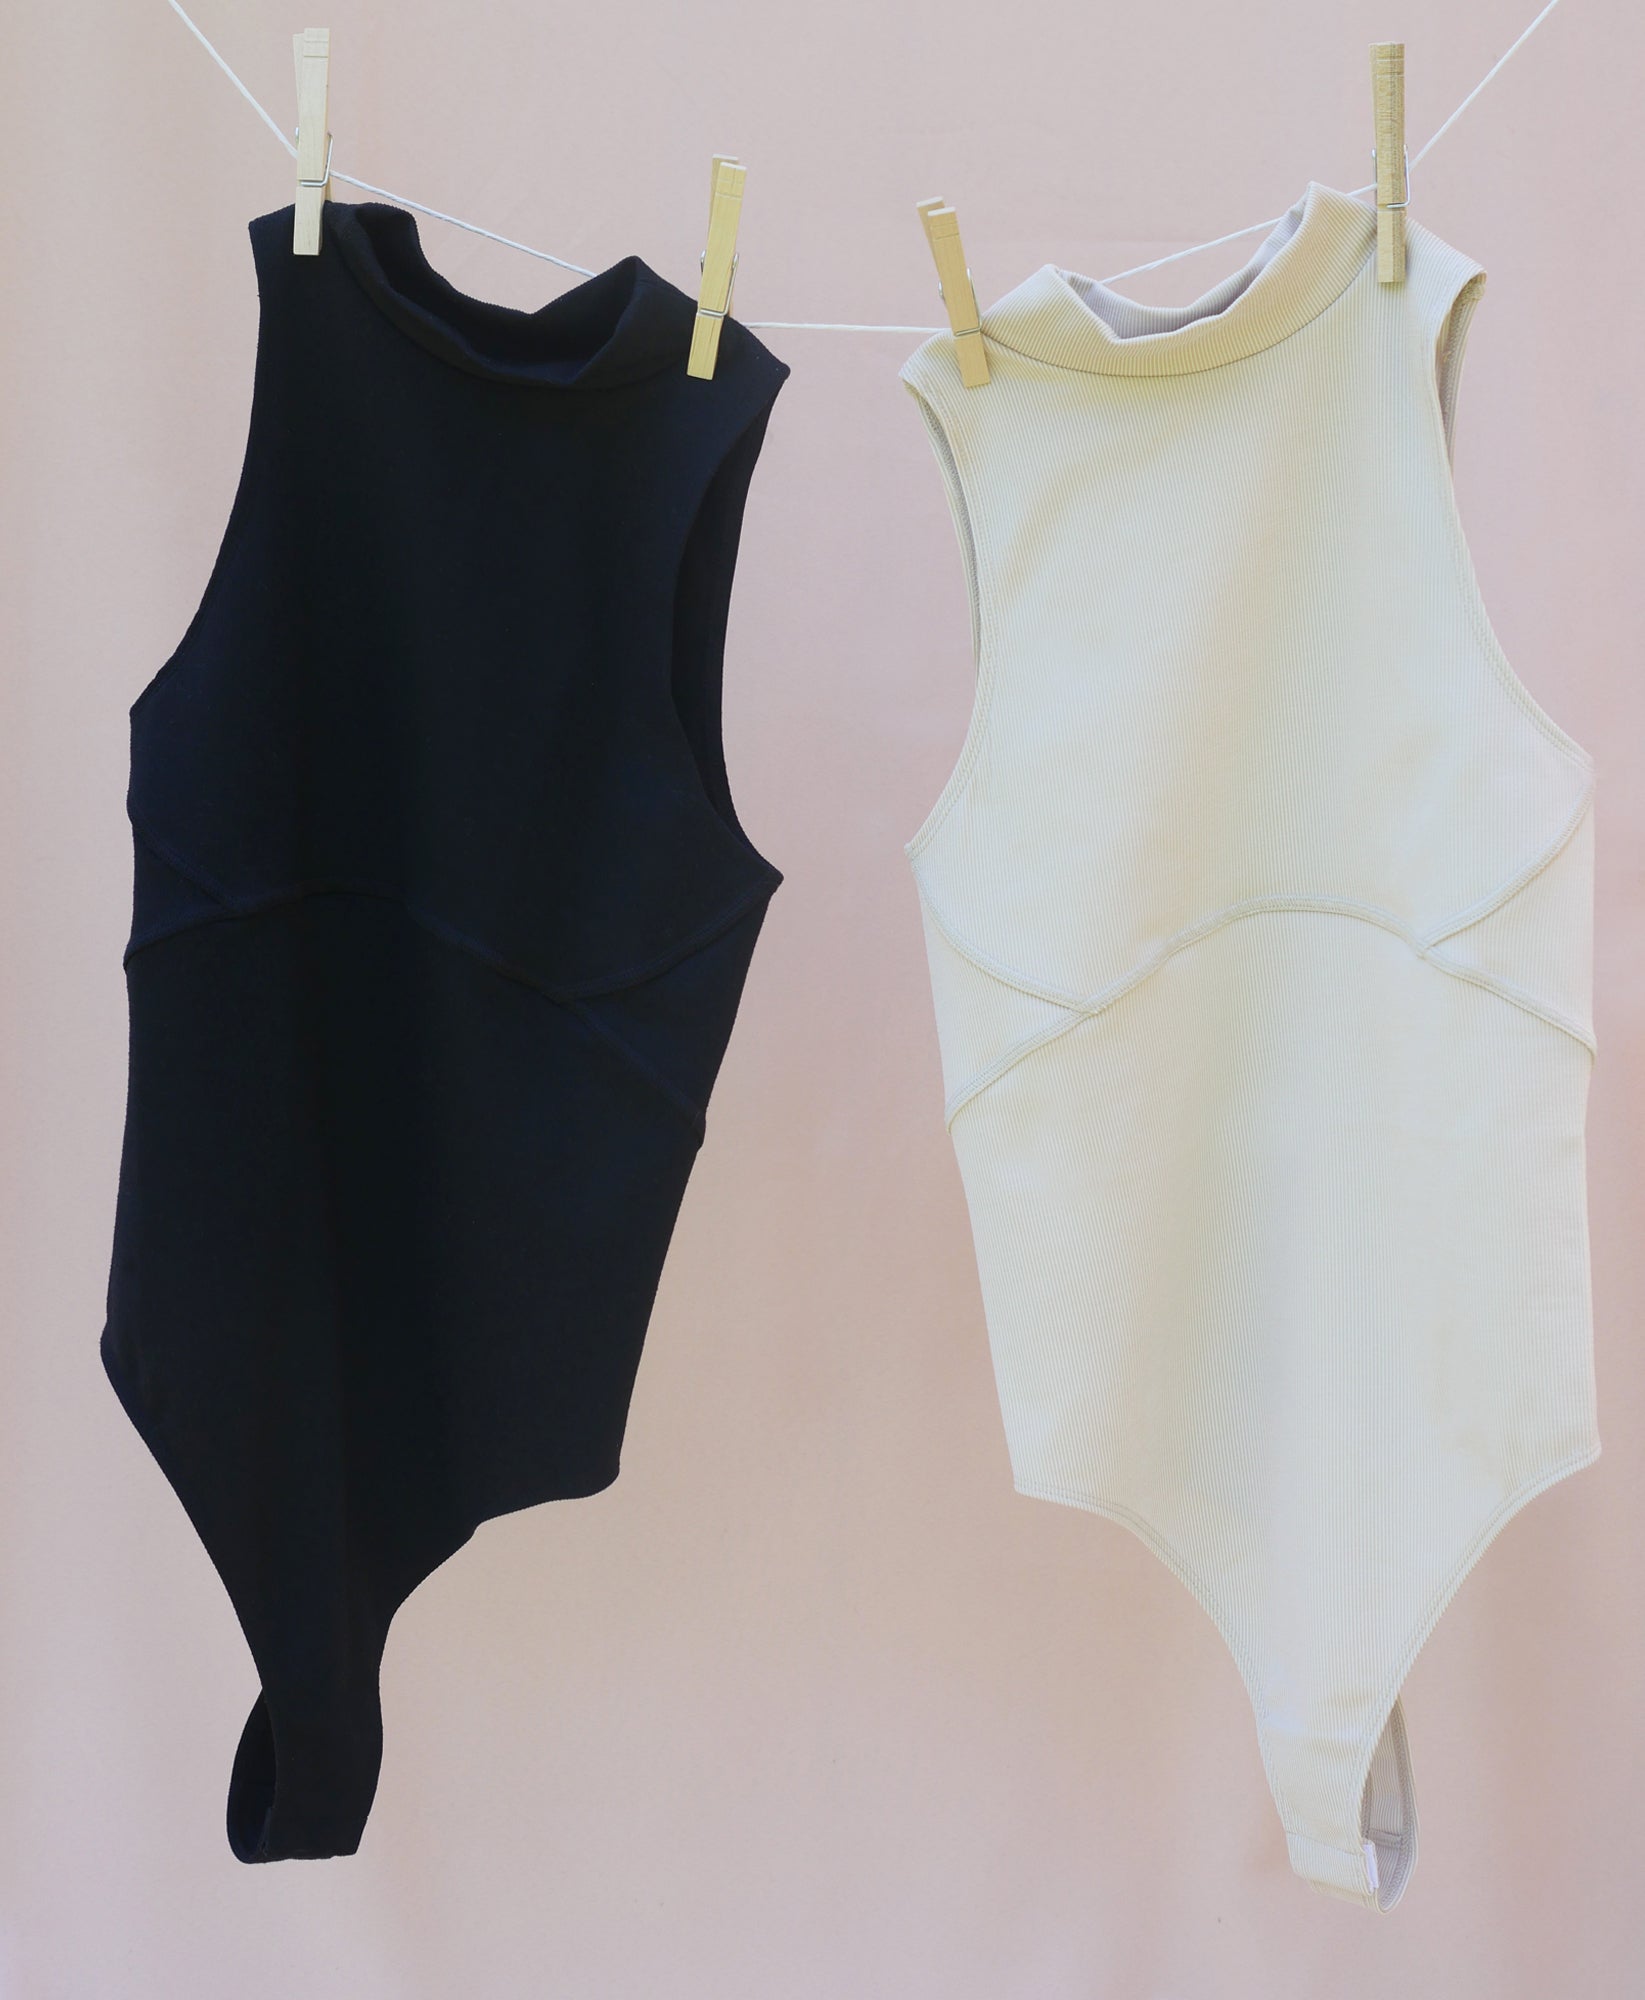 Wear One's At Aerobic Rib Bodysuit in Jet and Oatmeal Flat Front